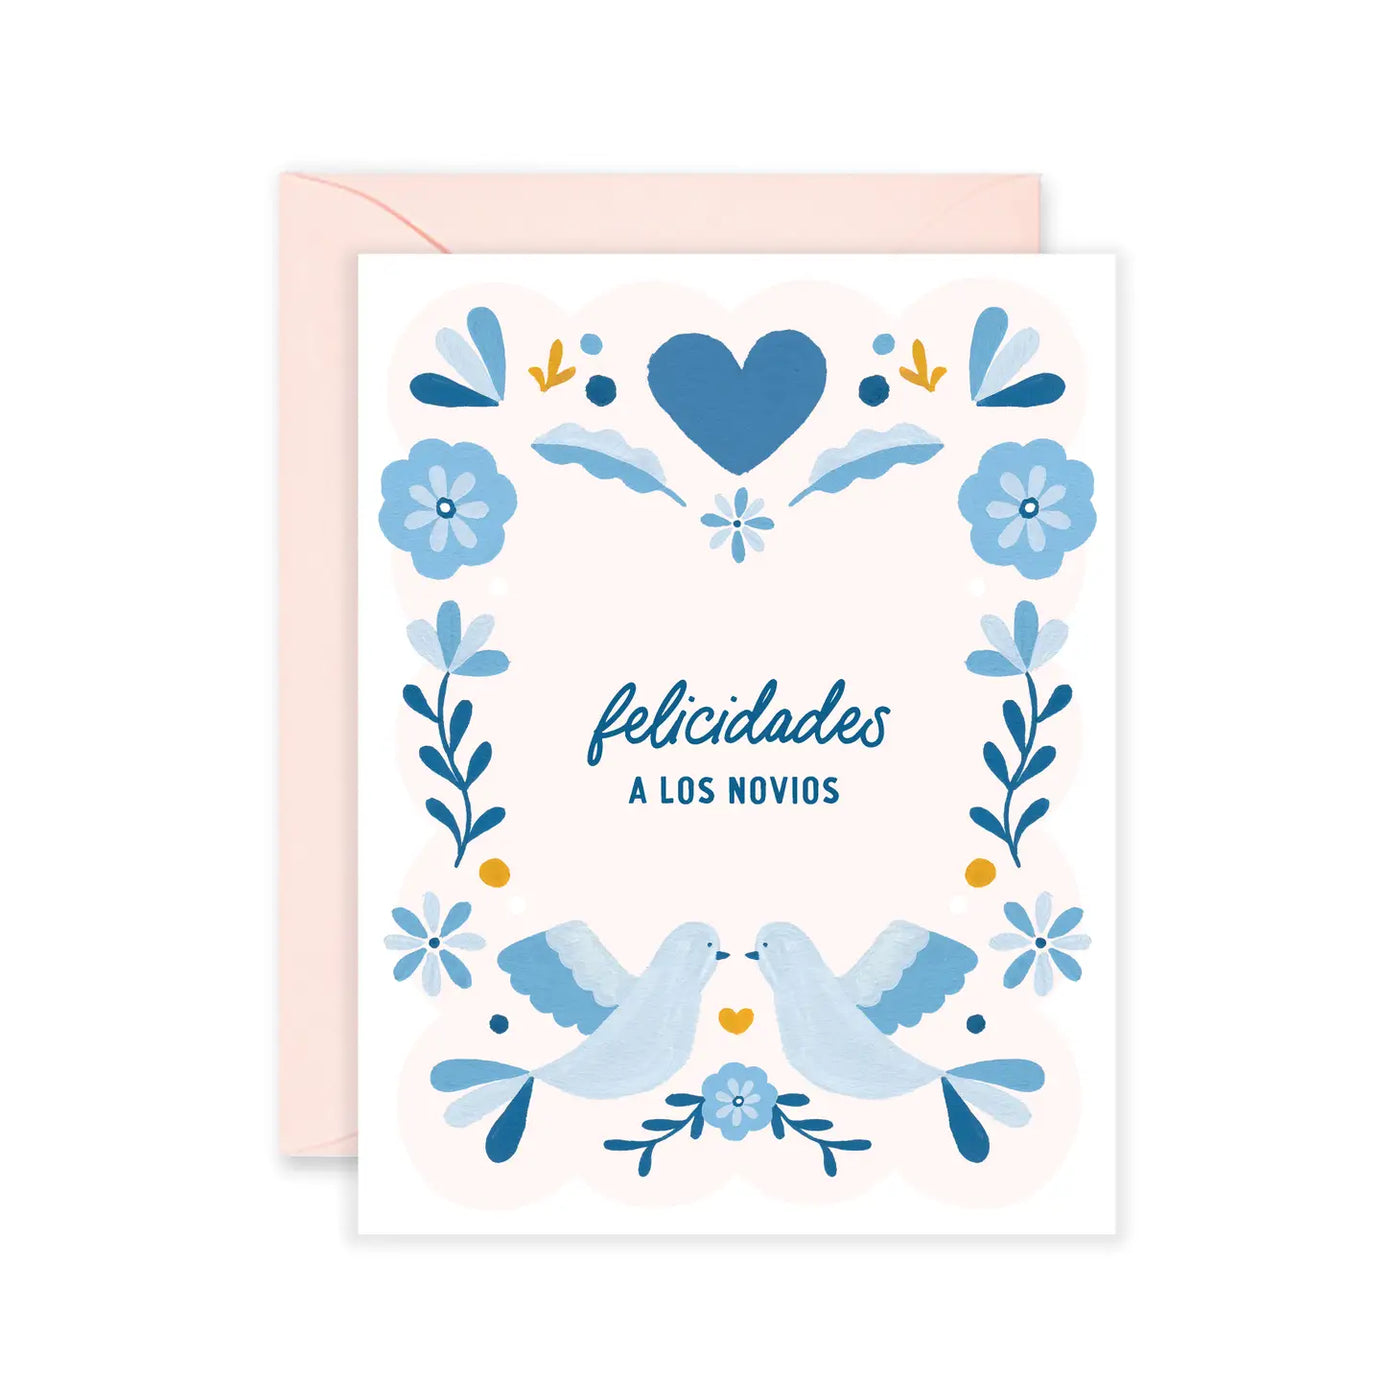 white card with the phrase felicidades a los novios in blue lettering and features images of two love birds, heart, flowers and foliage in various shades of blue and a pink envelope.